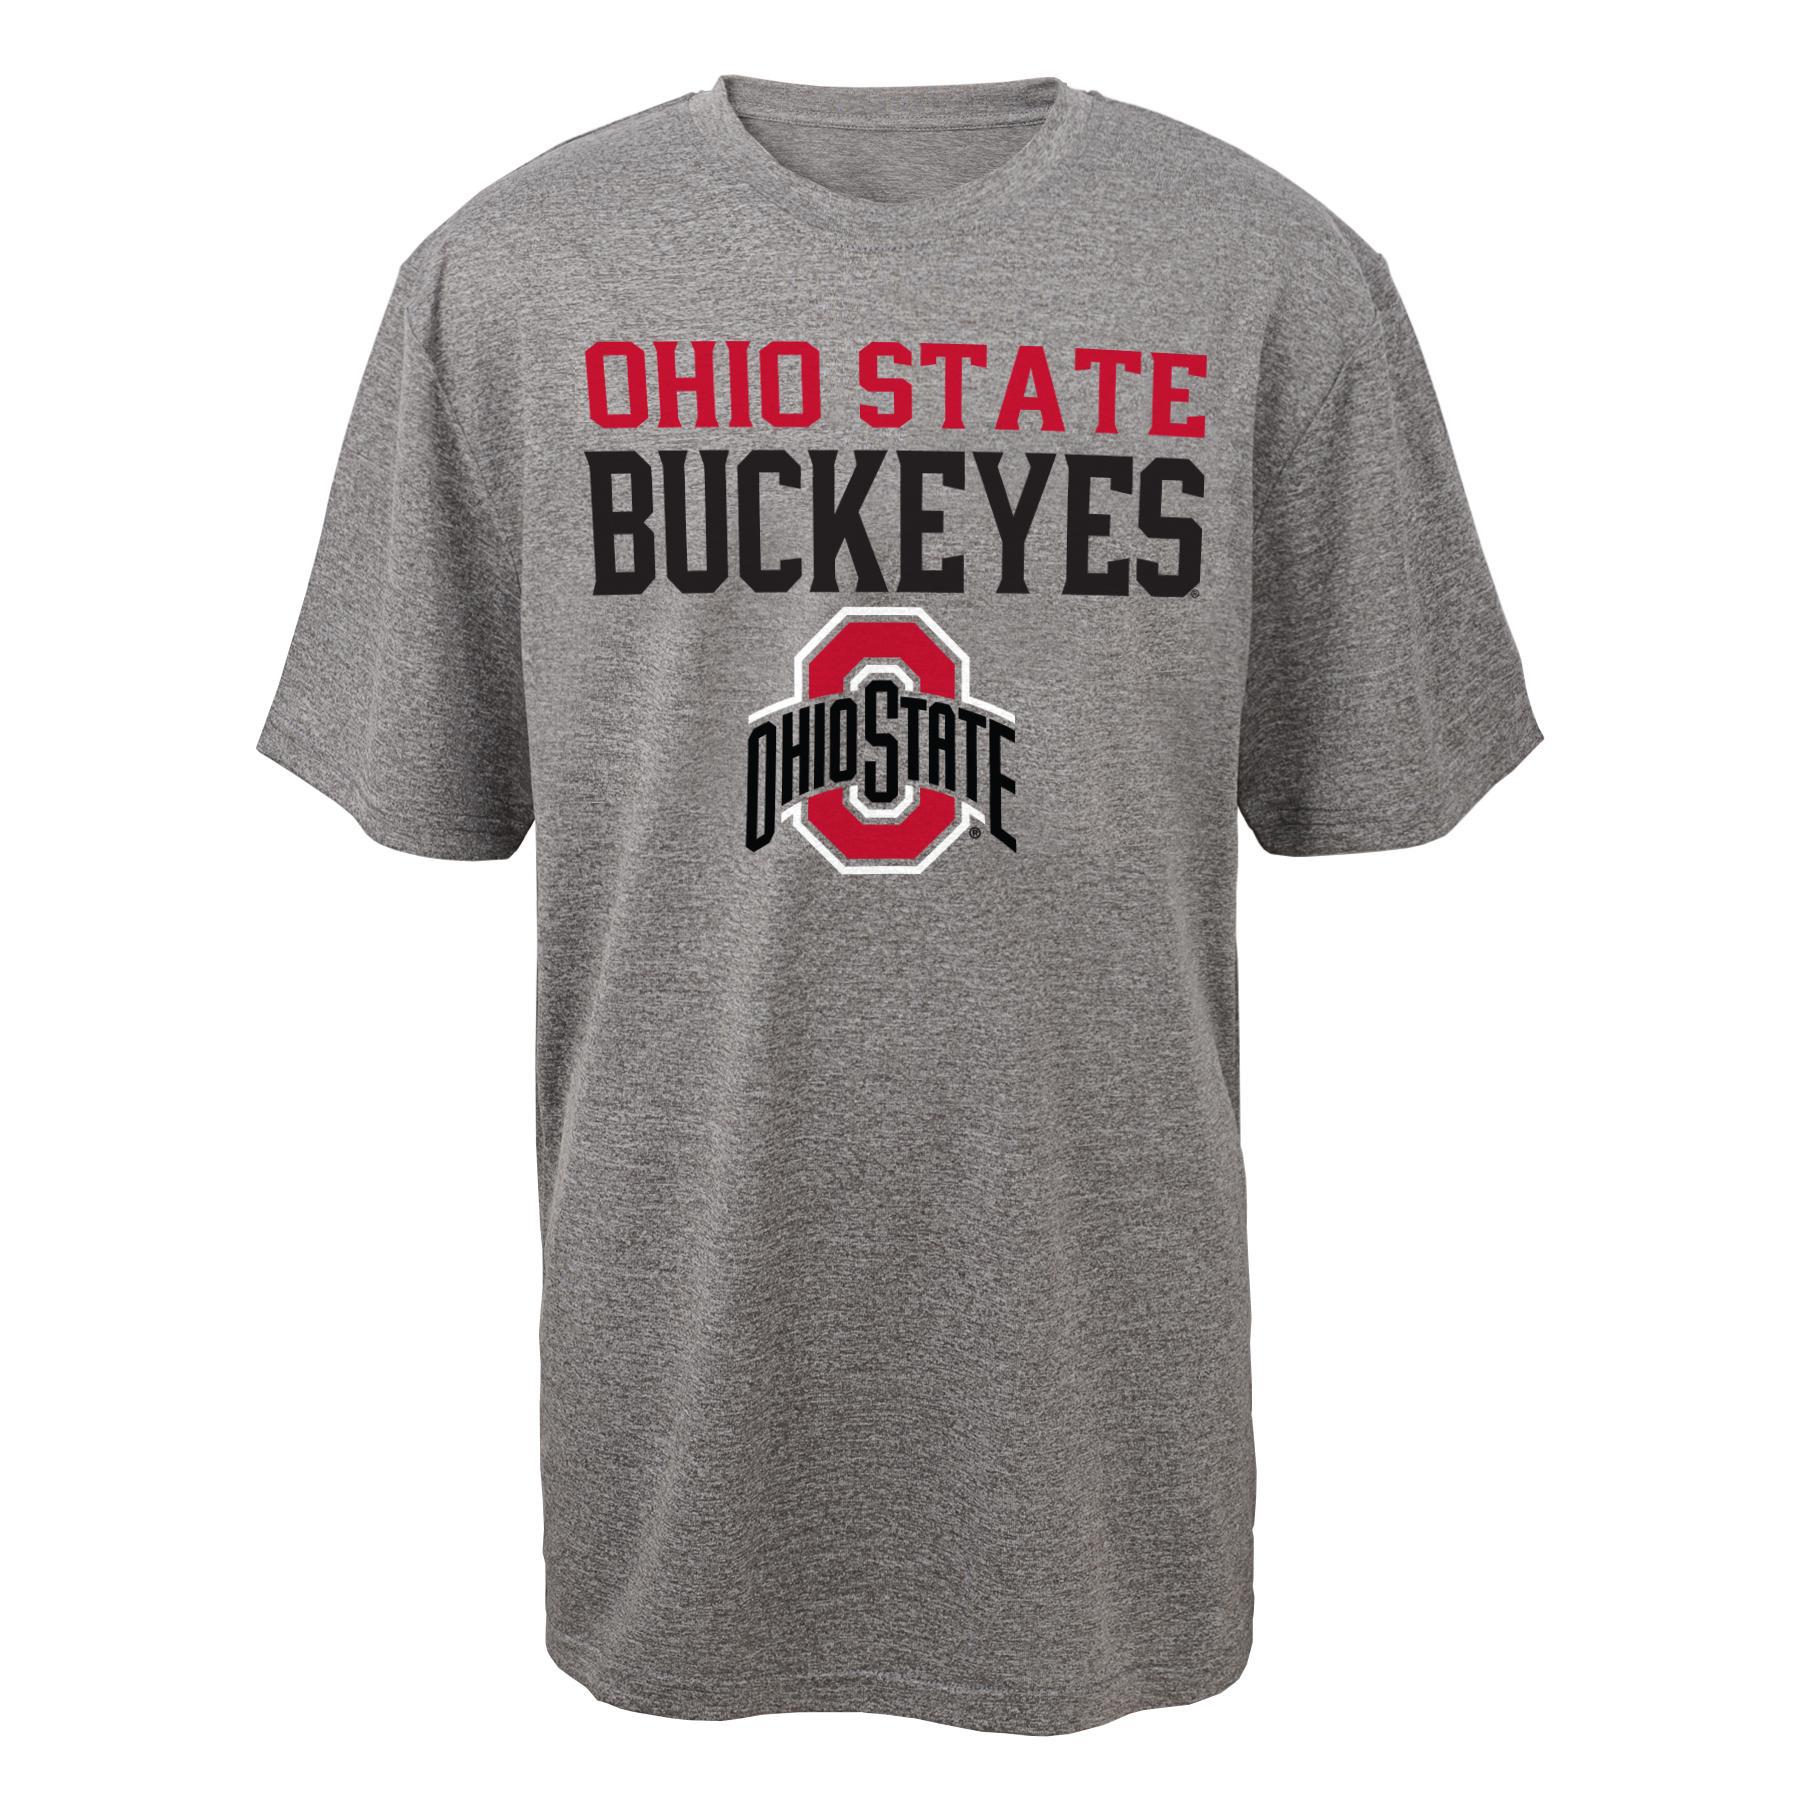 NCAA Infant & Toddler Boy's Graphic T-Shirt - Ohio State Buckeyes